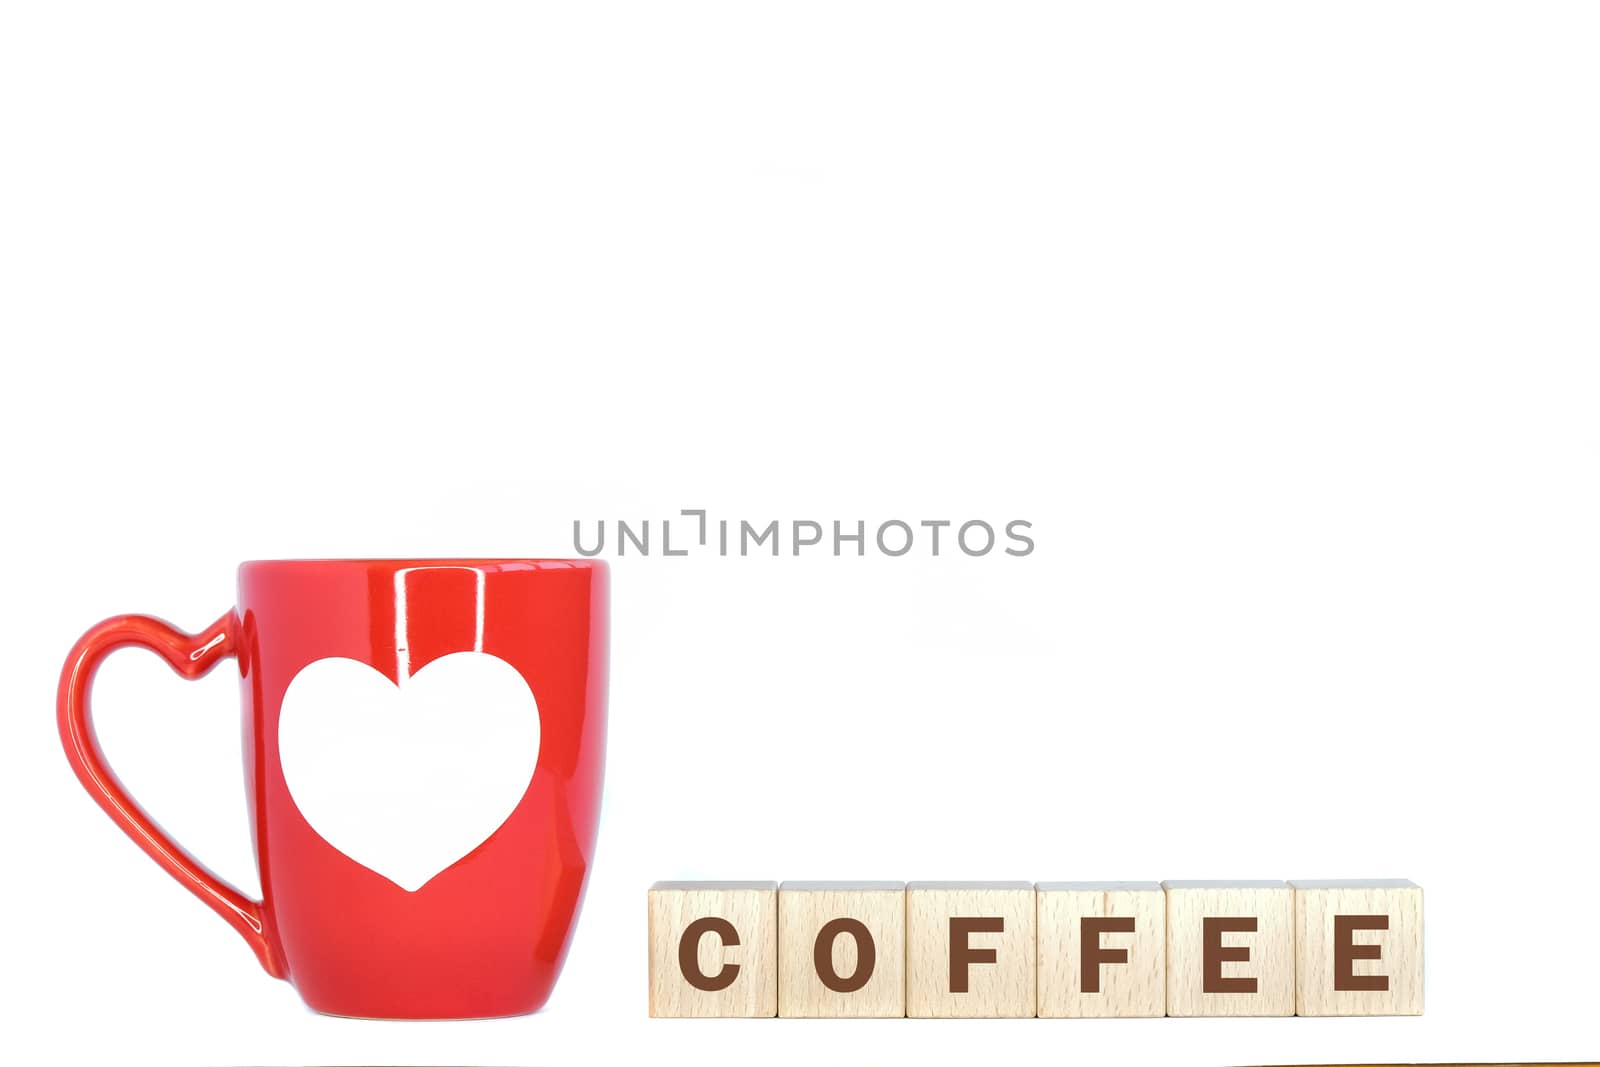 A red coffee mug with white heart pattern and wooden blocks with text spelling coffee. Isolated on white background.